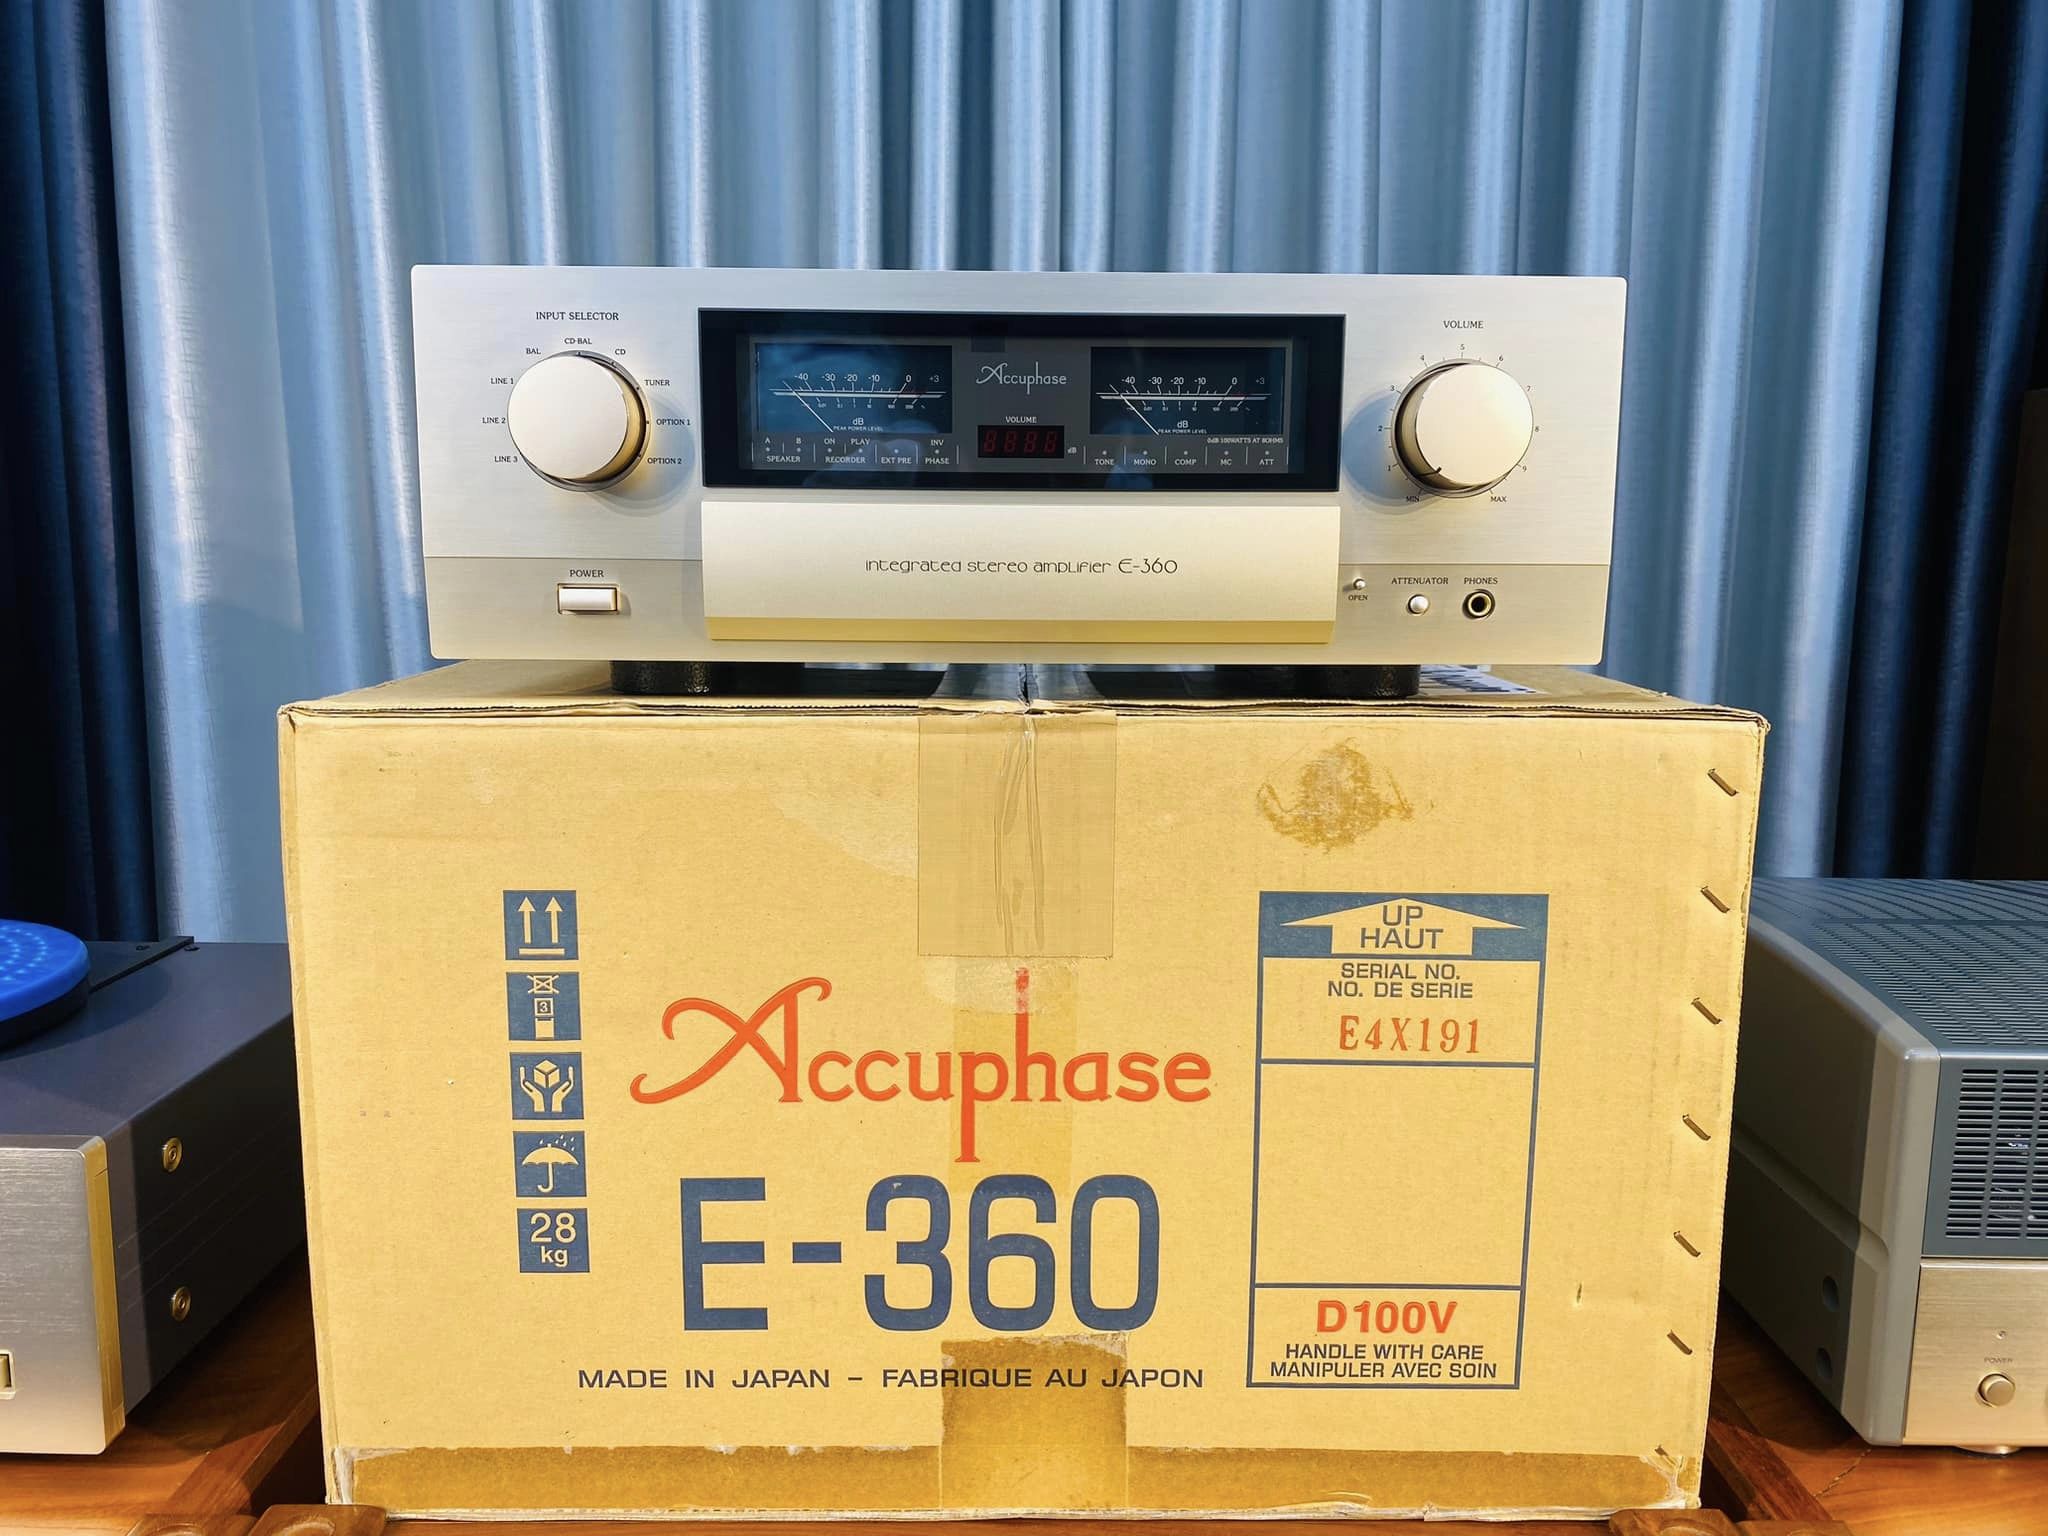 ACCUPHASE E-360